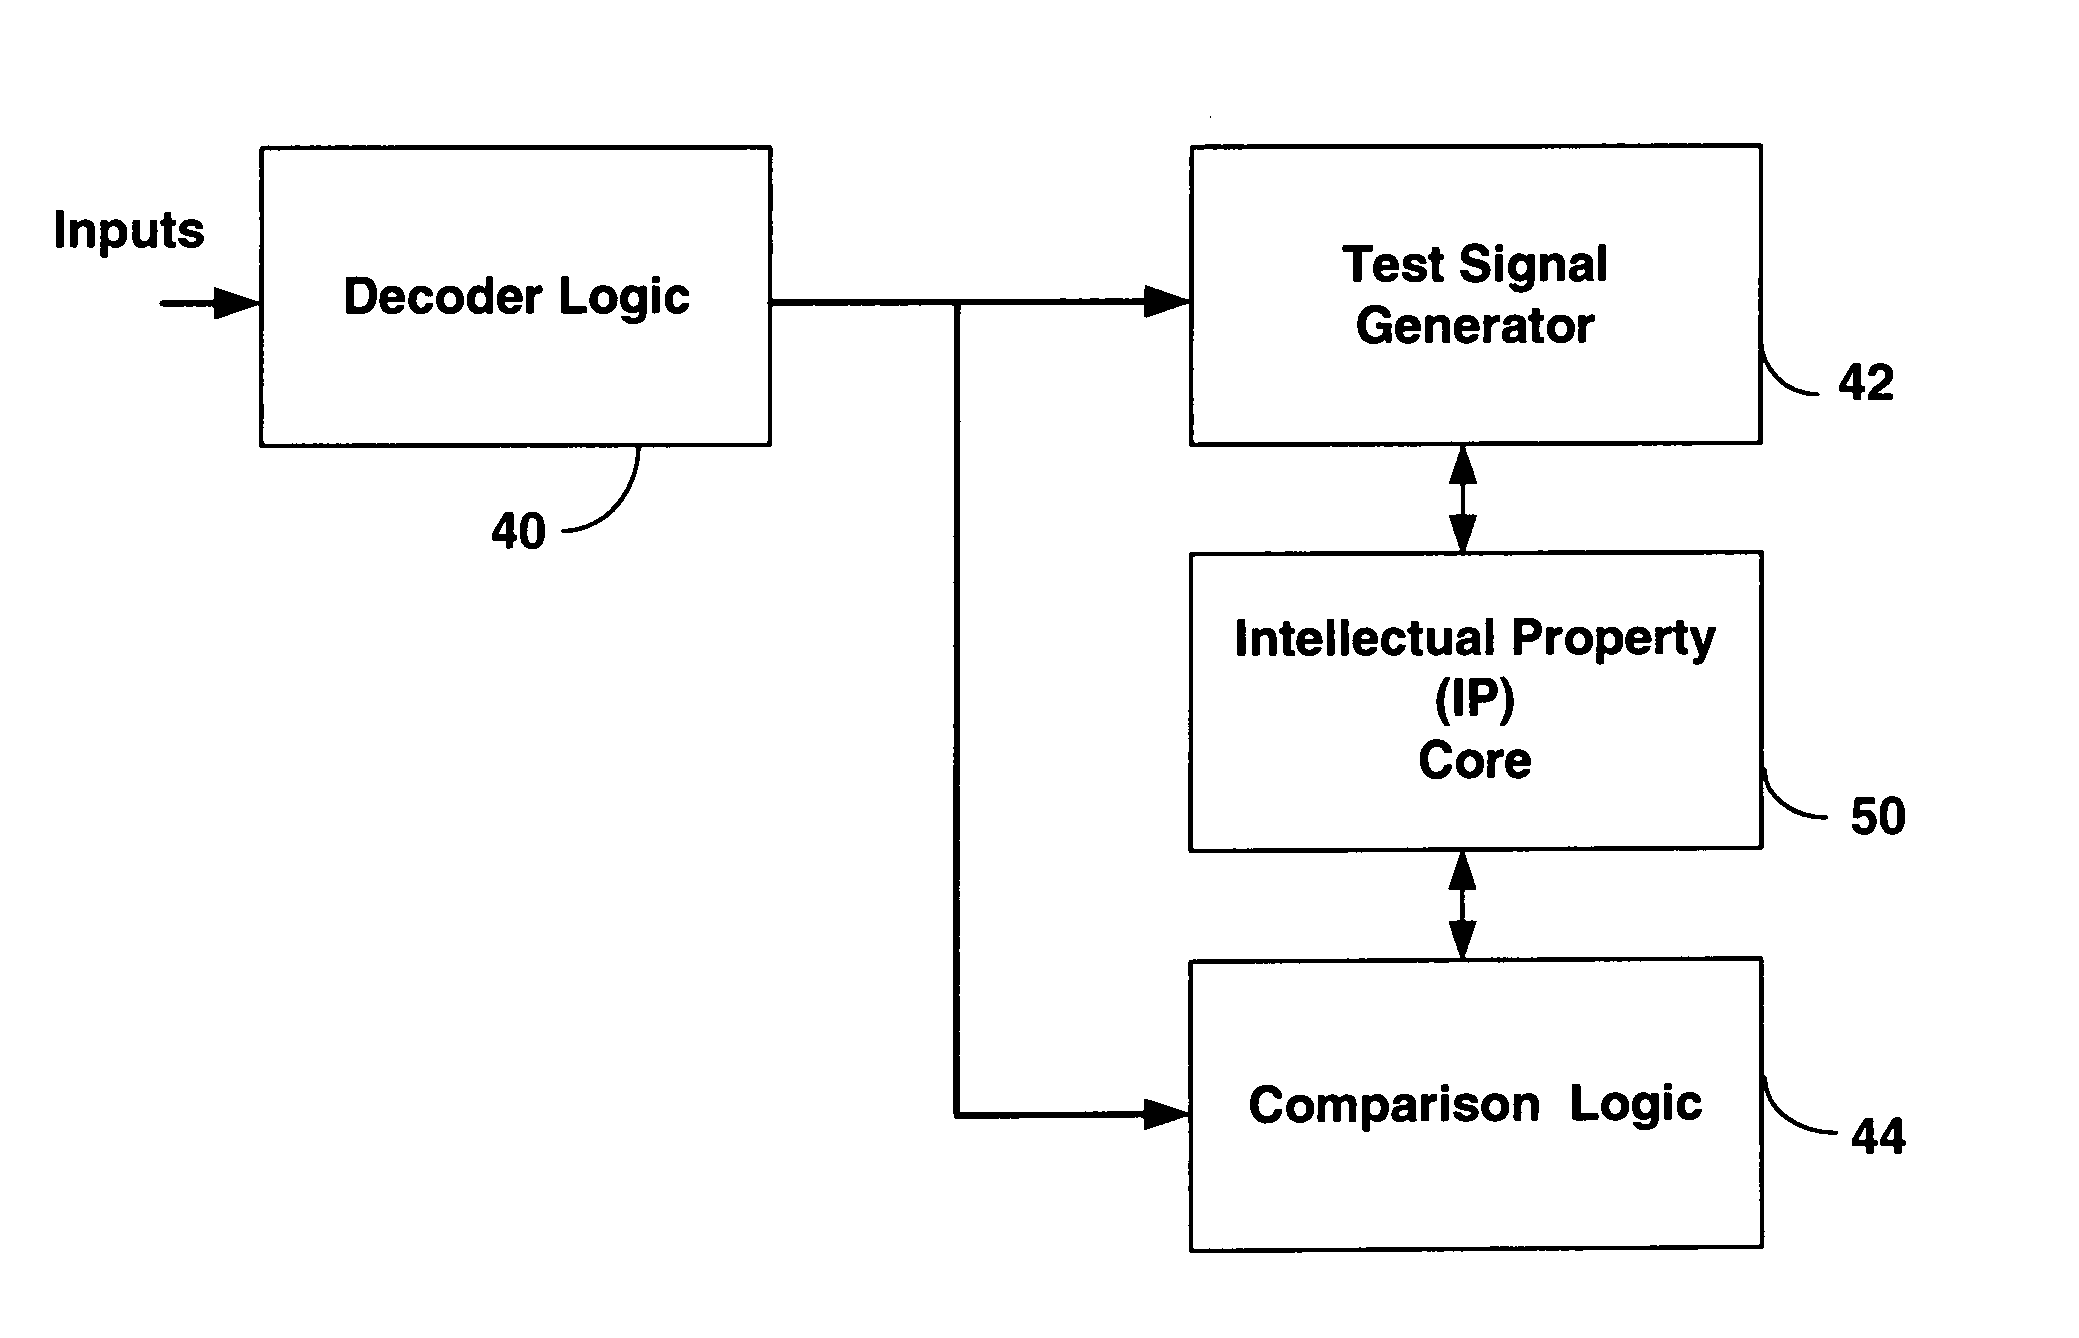 Built-in self test (BIST) technology for testing field programmable gate arrays (FPGAs) using partial reconfiguration